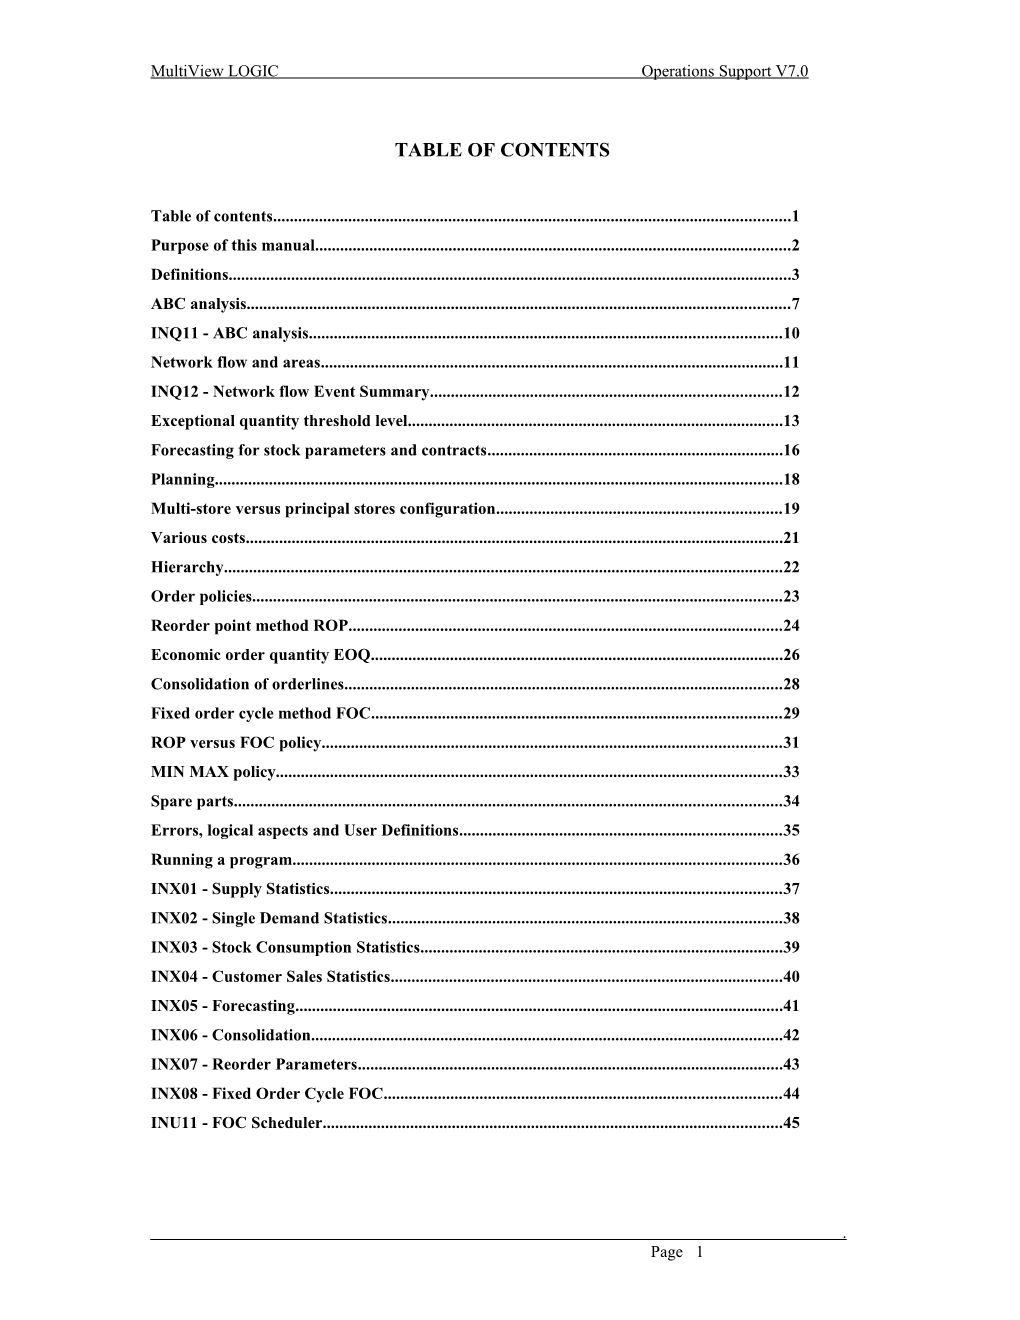 Table of Contents s511